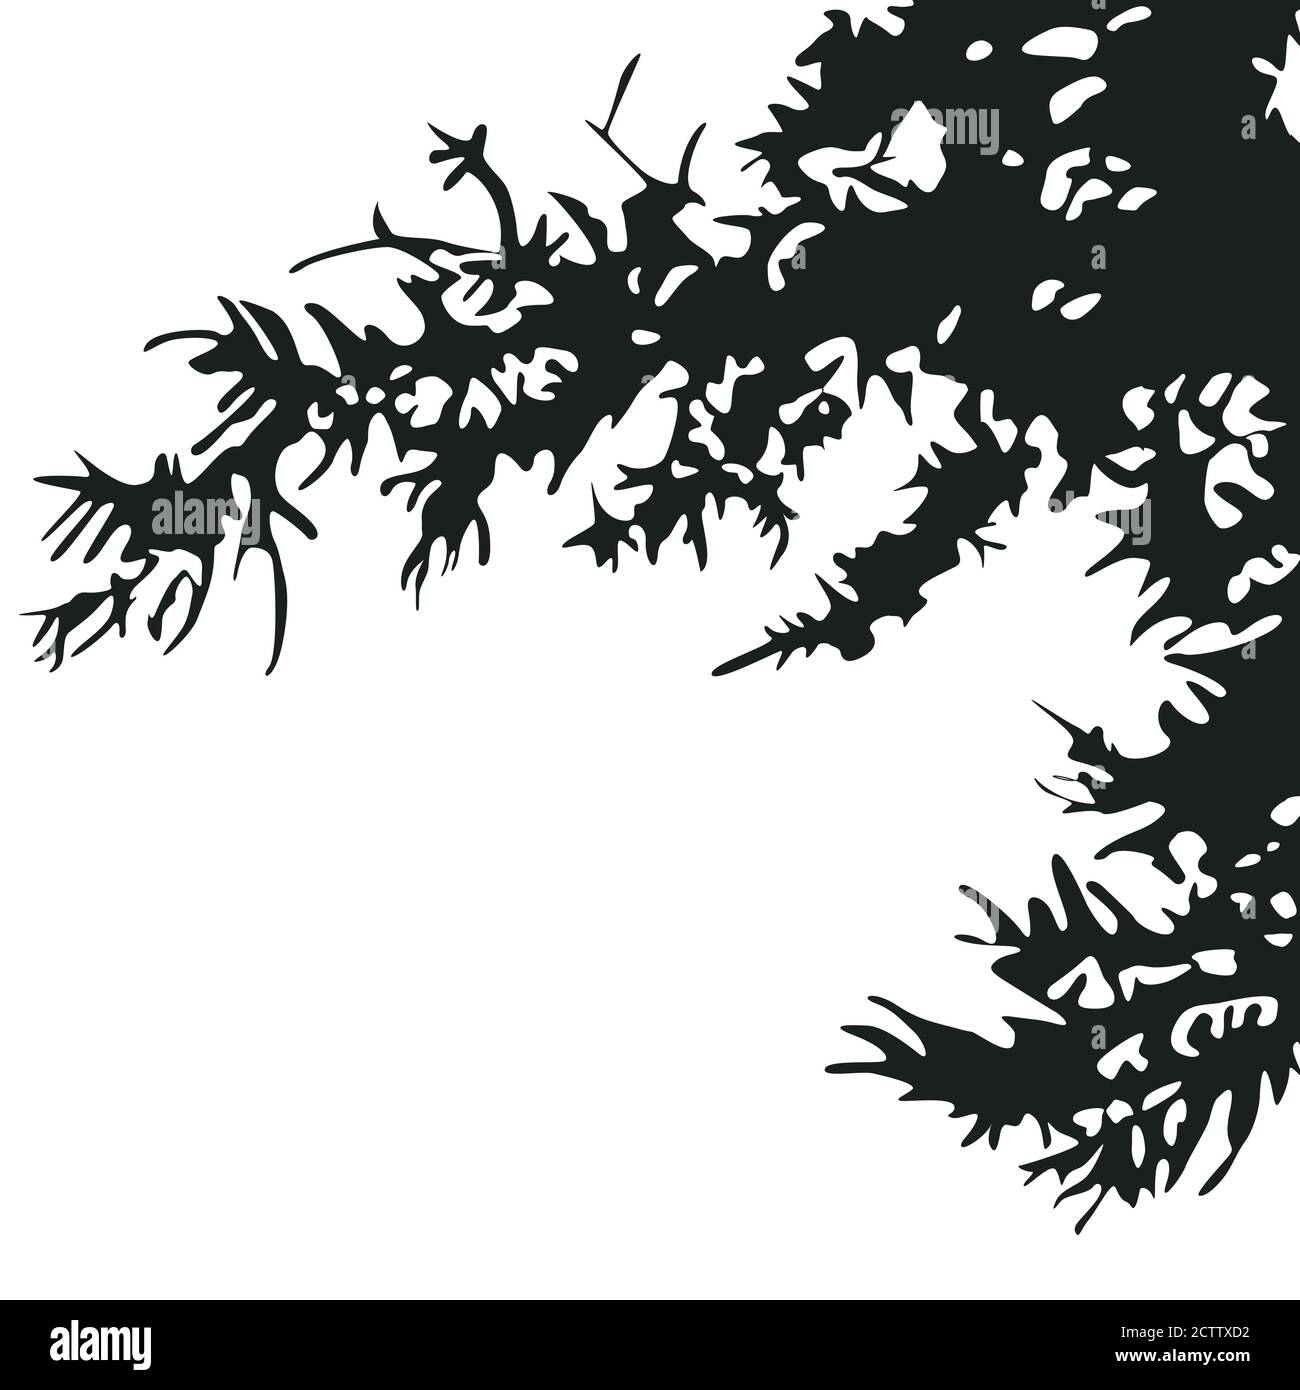 Black silhouette shadows from trees and branches Stock Vector